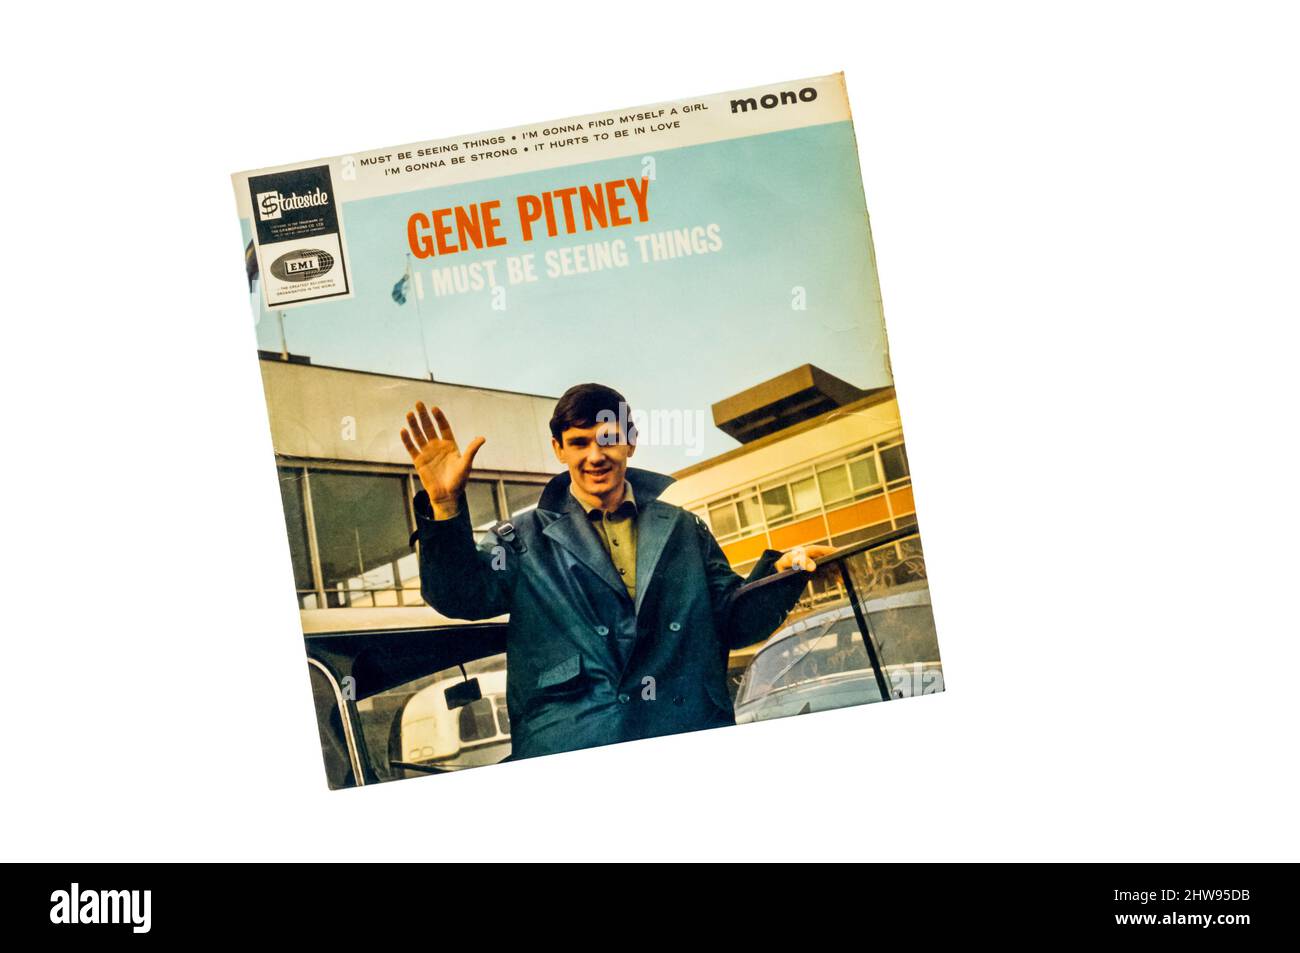 EP I Must be Seeing Things by Gene Pitney released in 1965. Stock Photo